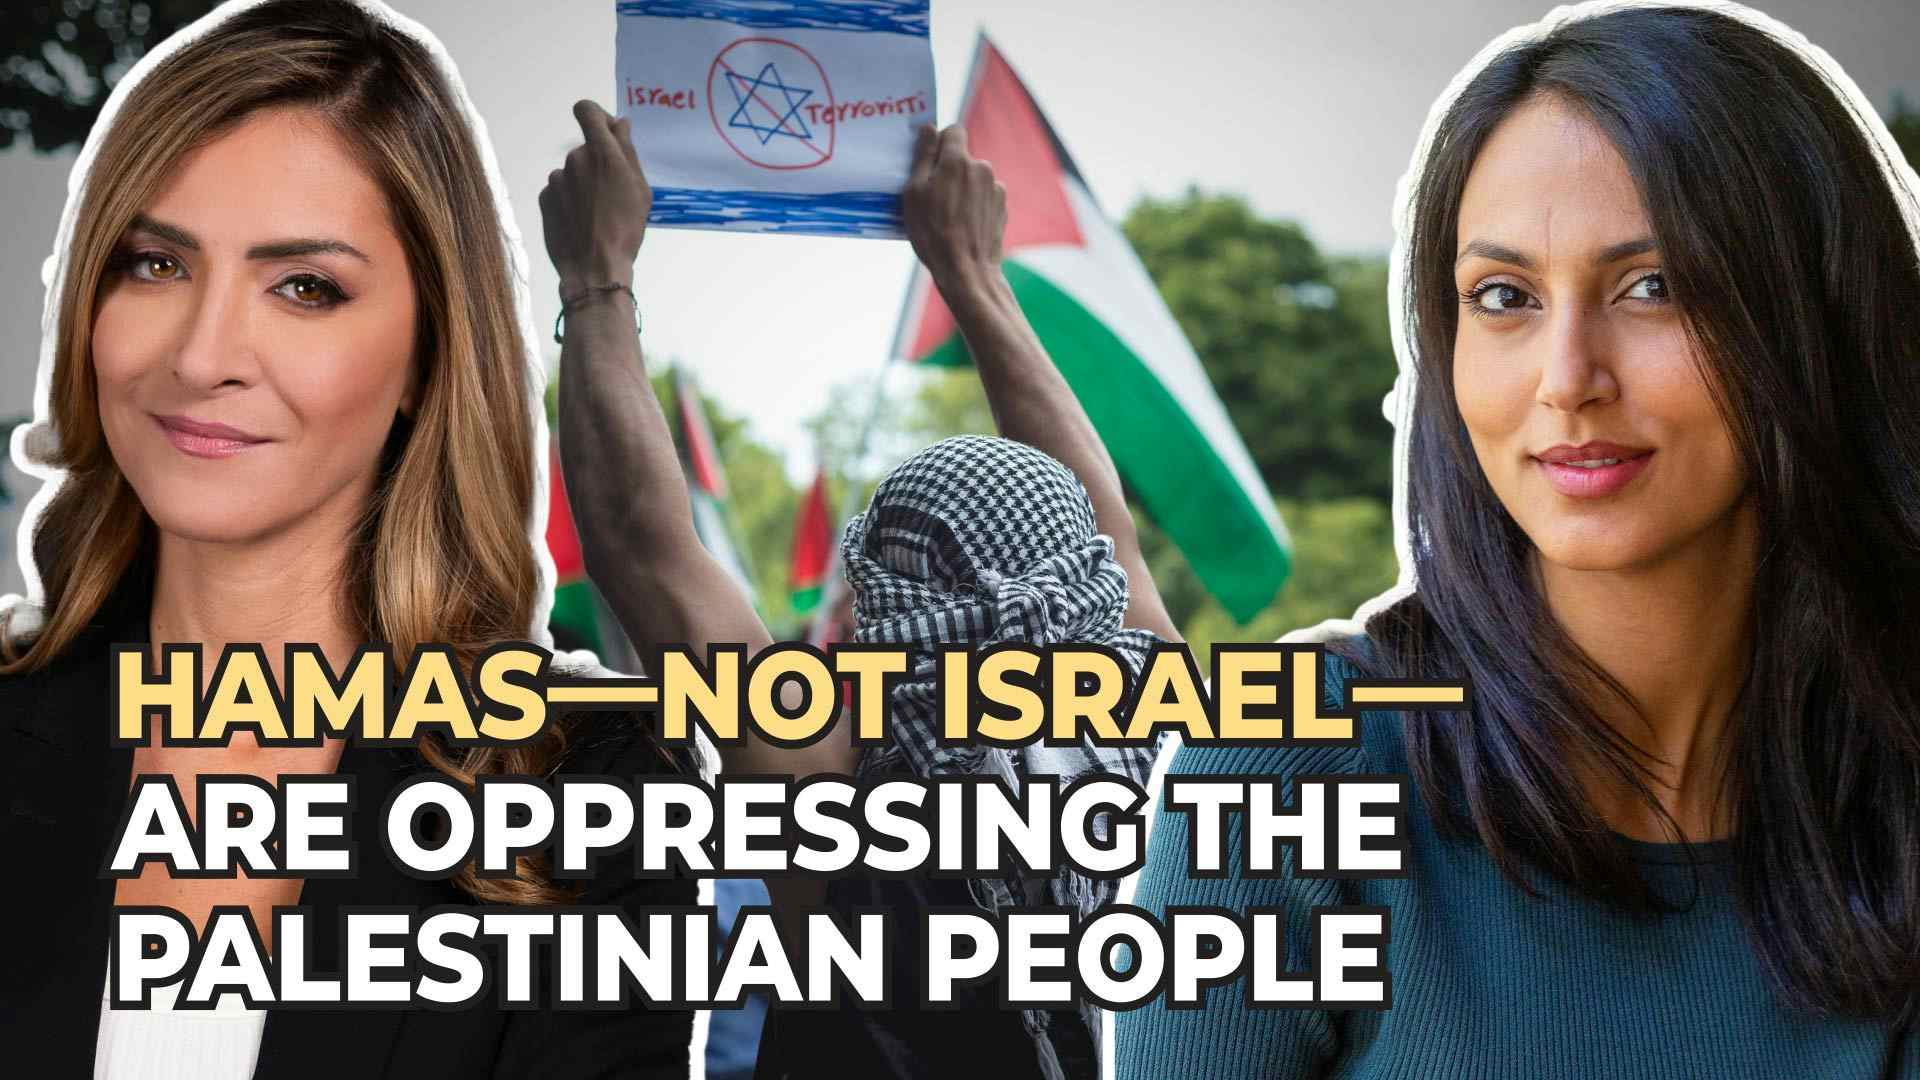 Hamas—Not Israel—Are Oppressing the Palestinian People